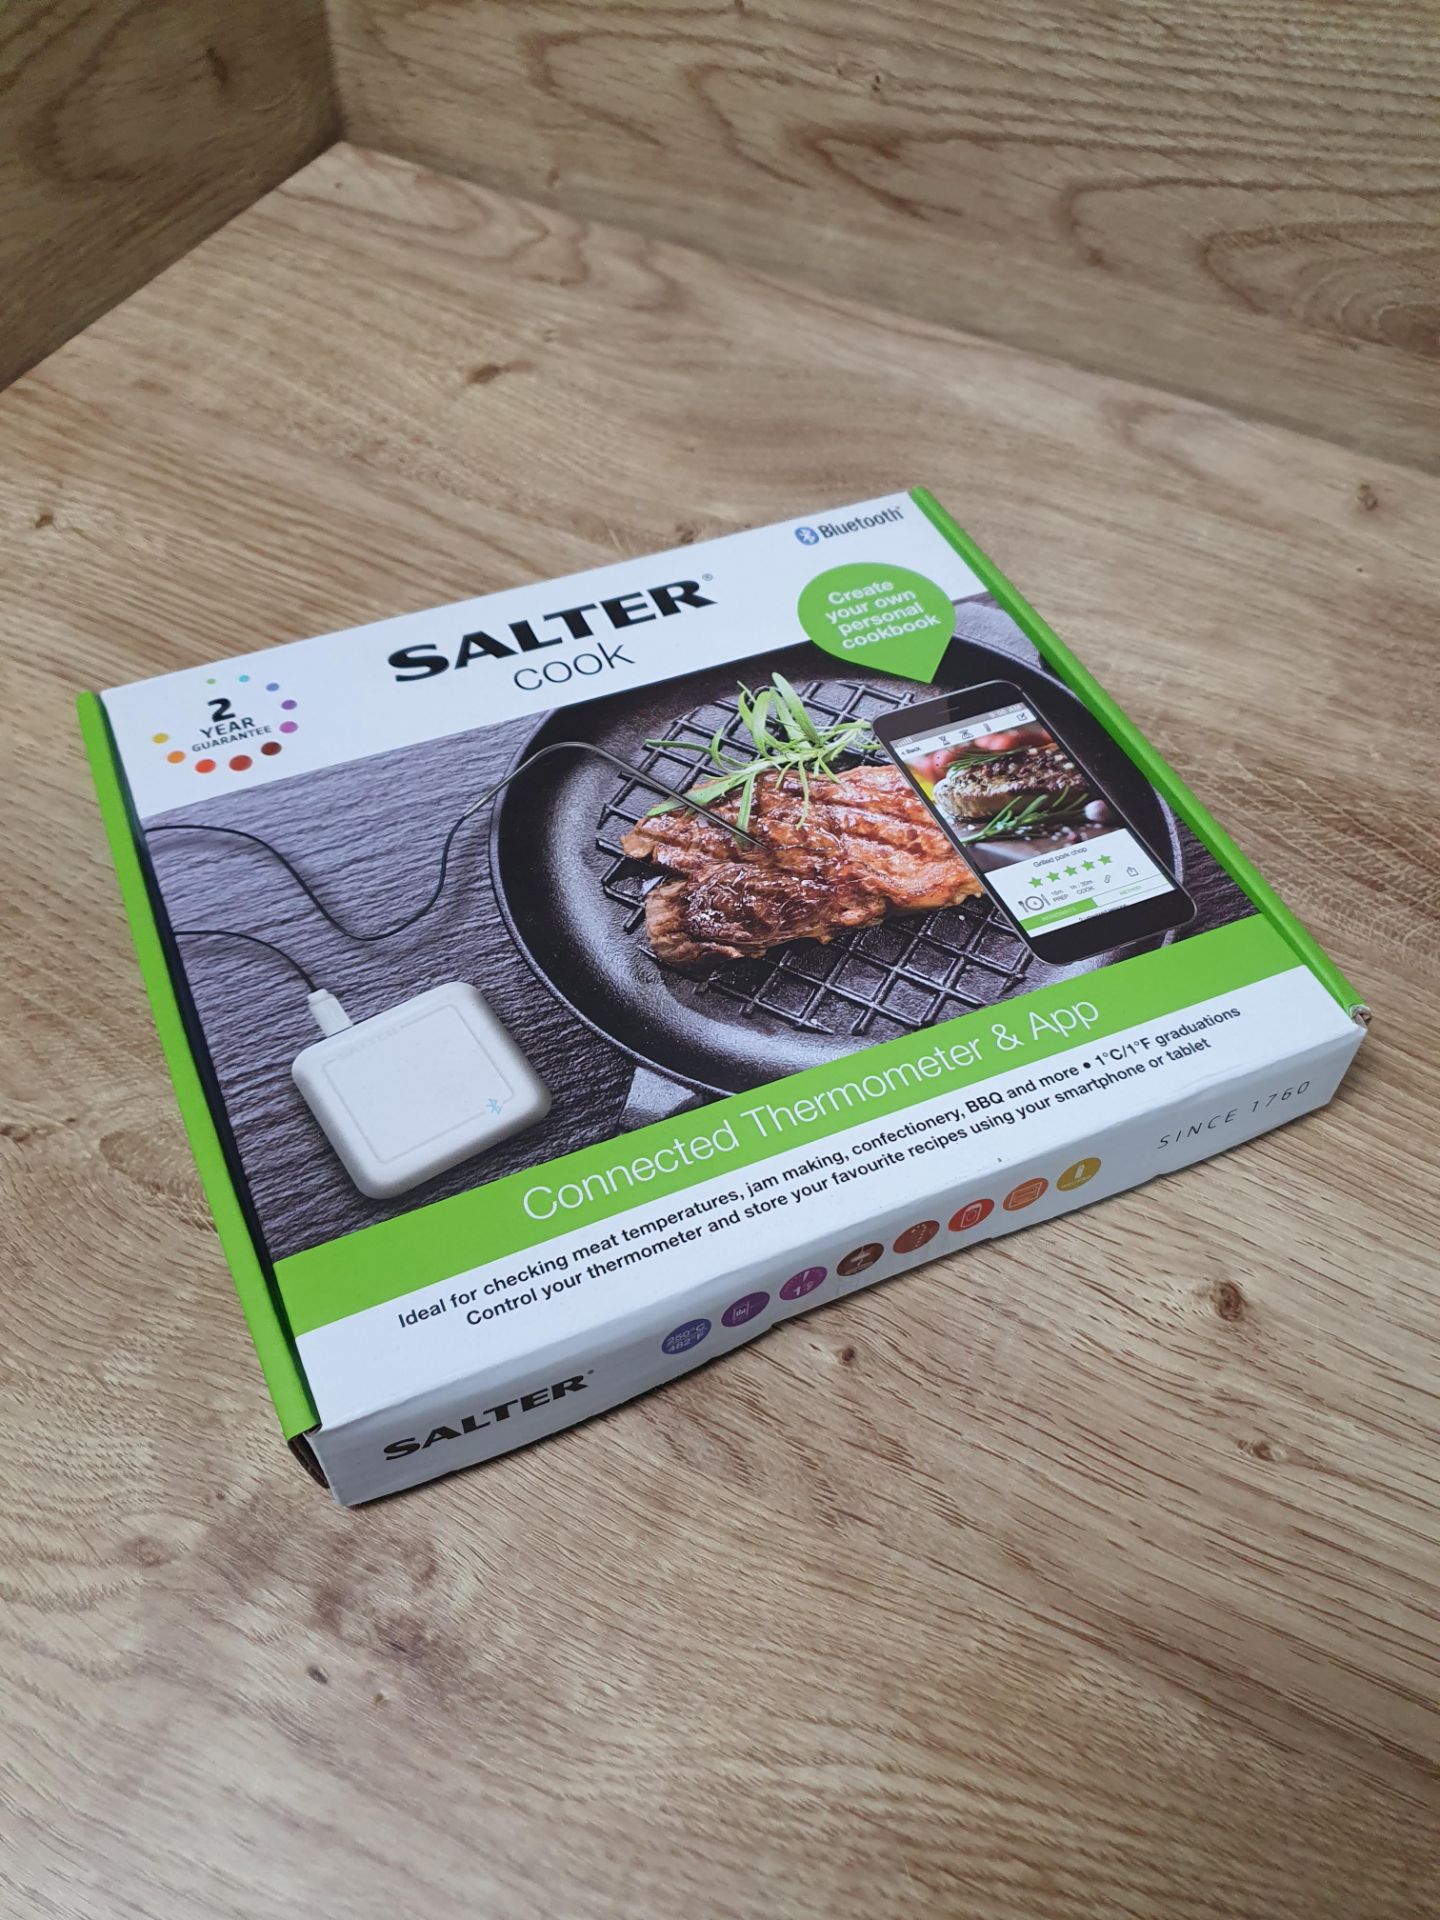 * Salter cook bluetooth thermometer RRP £36